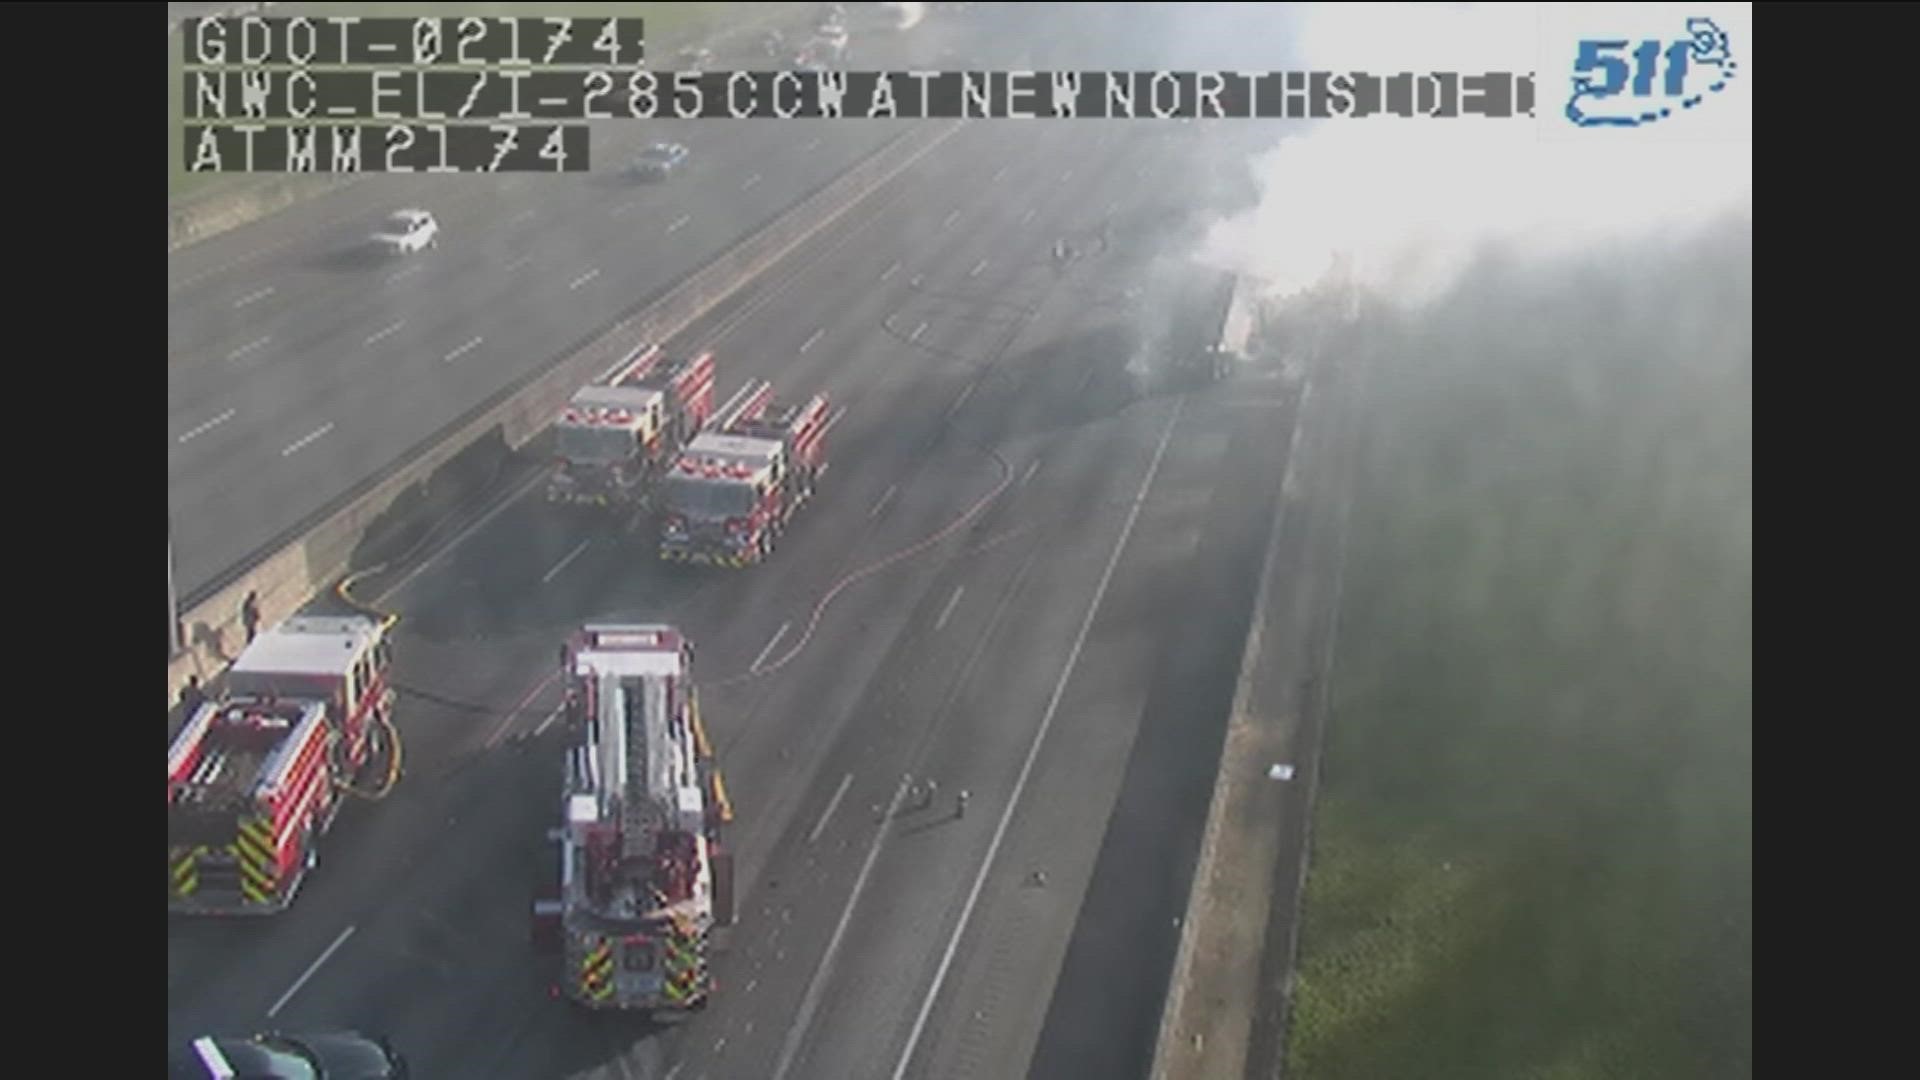 Here's a look at I-285 where crews needed to shut down traffic for what appears to be a semi-truck fire. This is near Northside Drive in Sandy Springs.